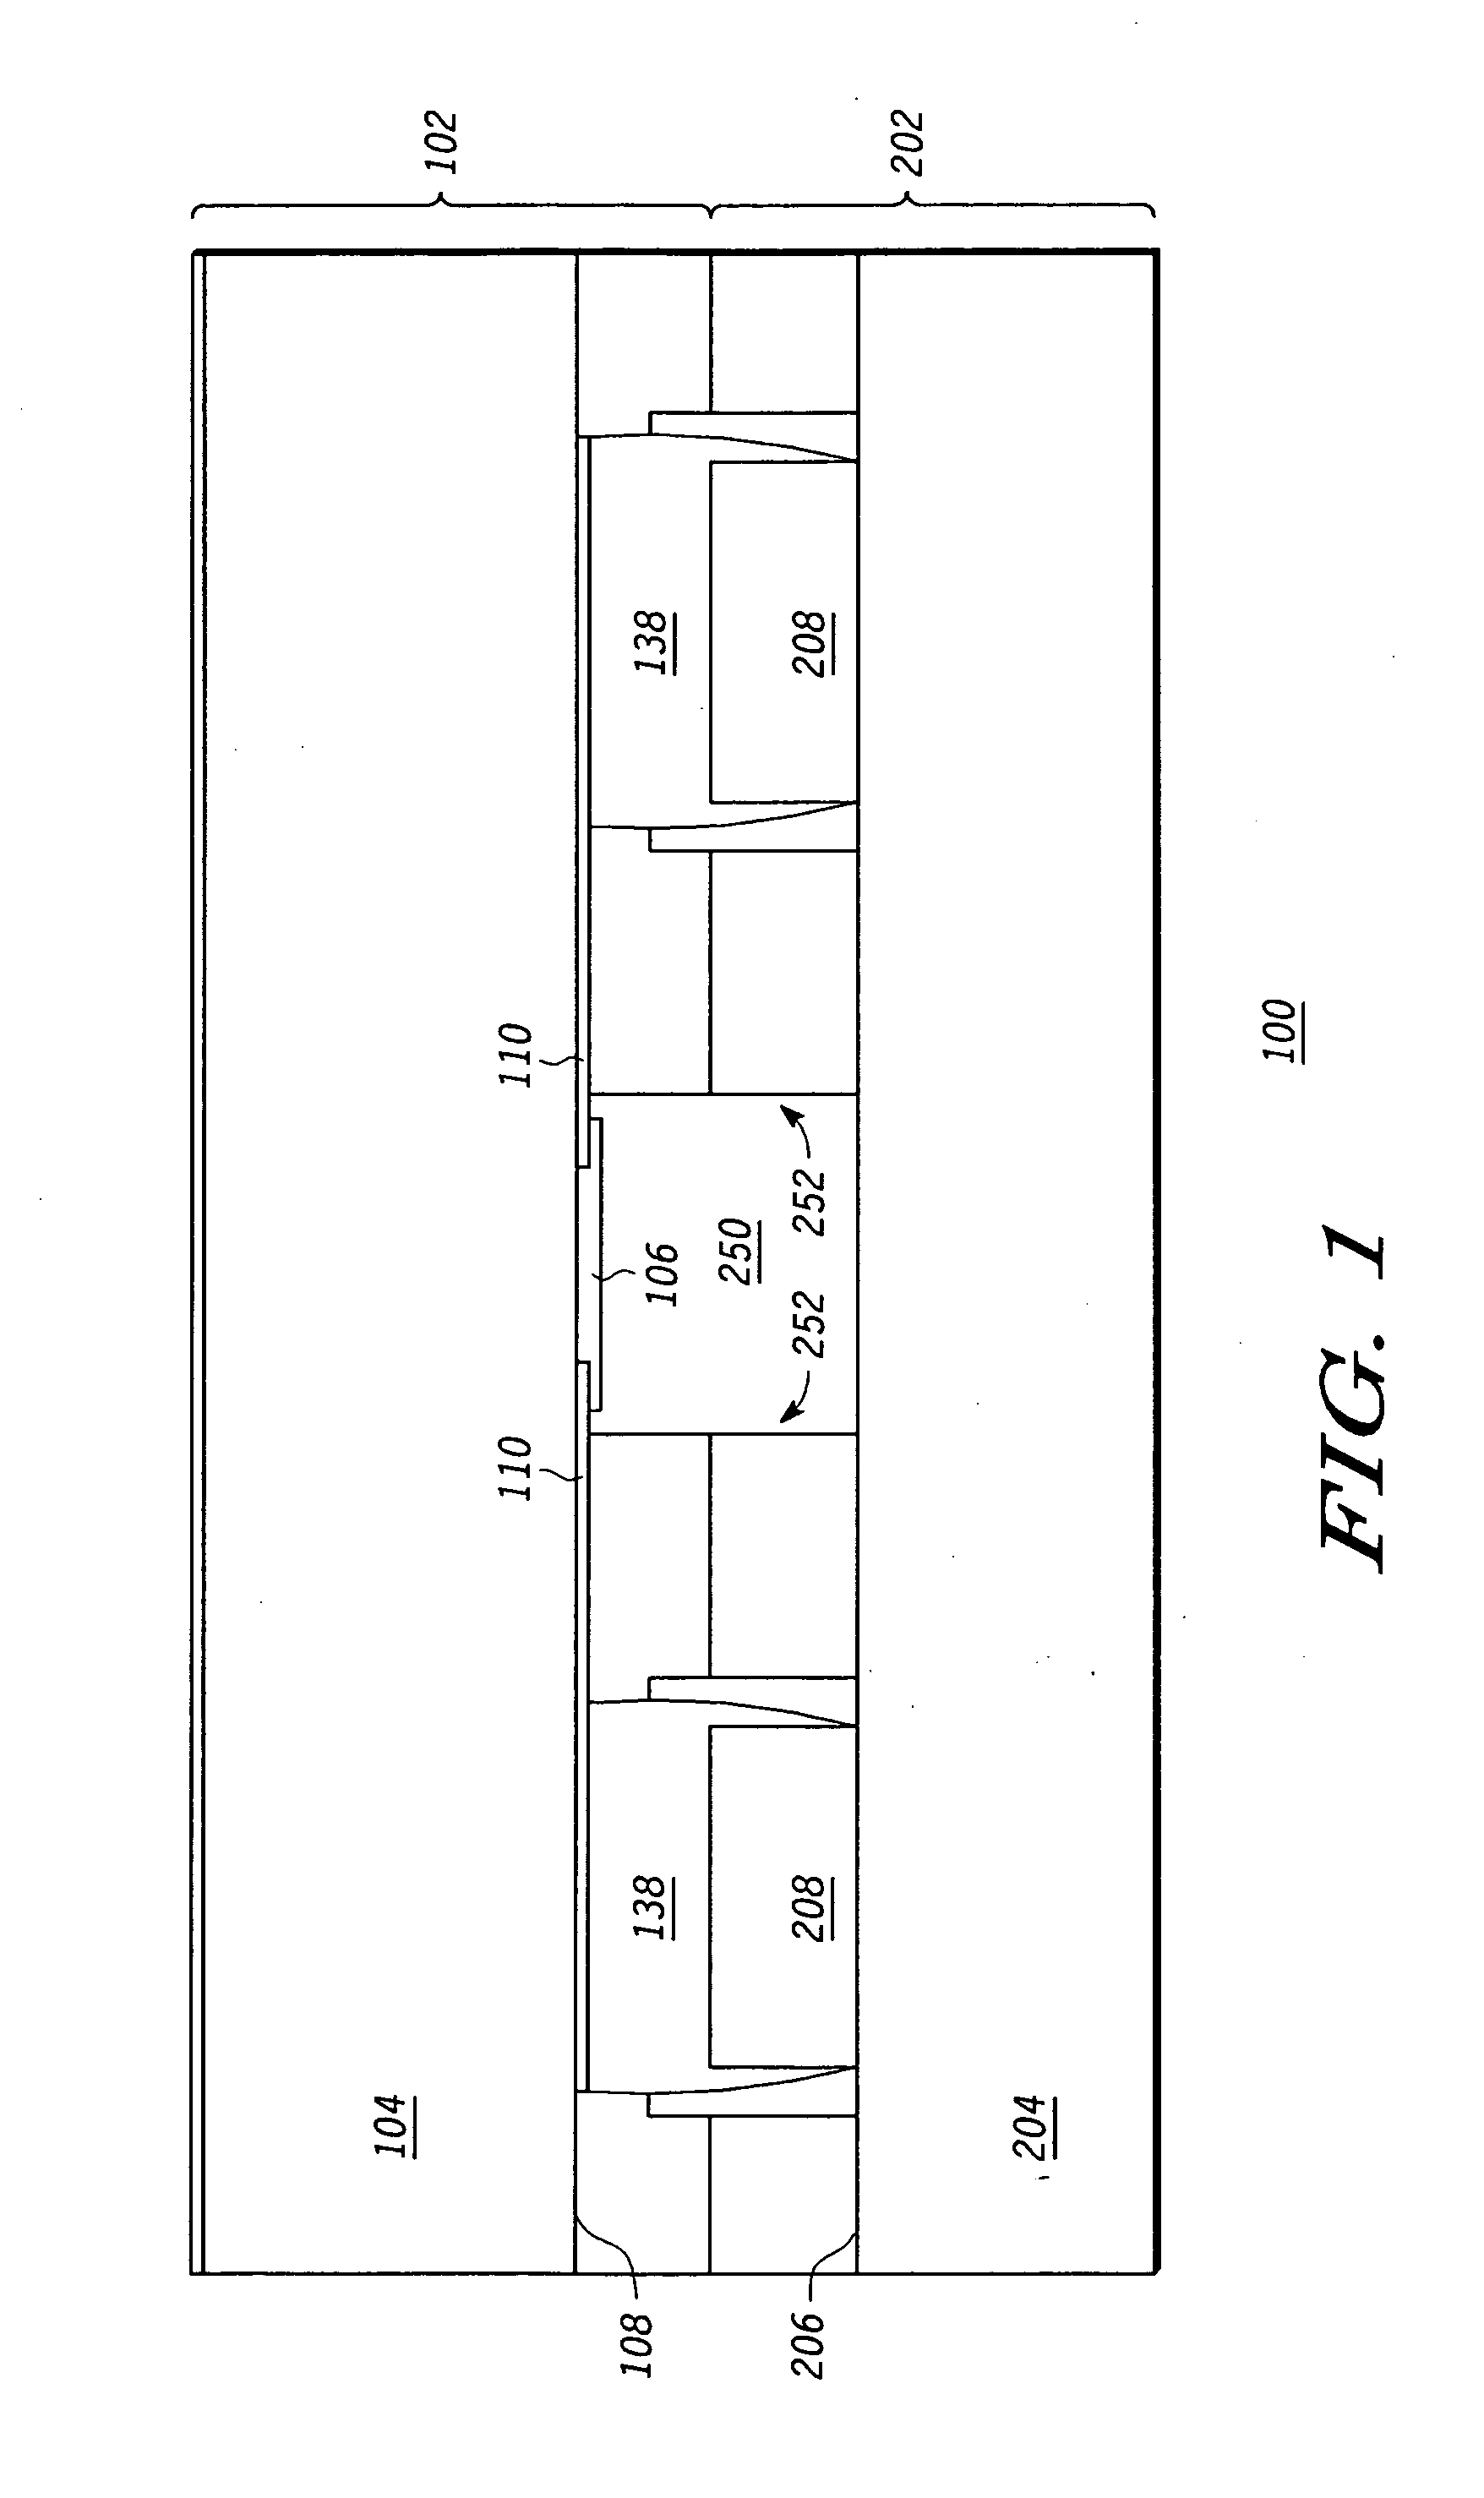 MEMS package and method of forming the same